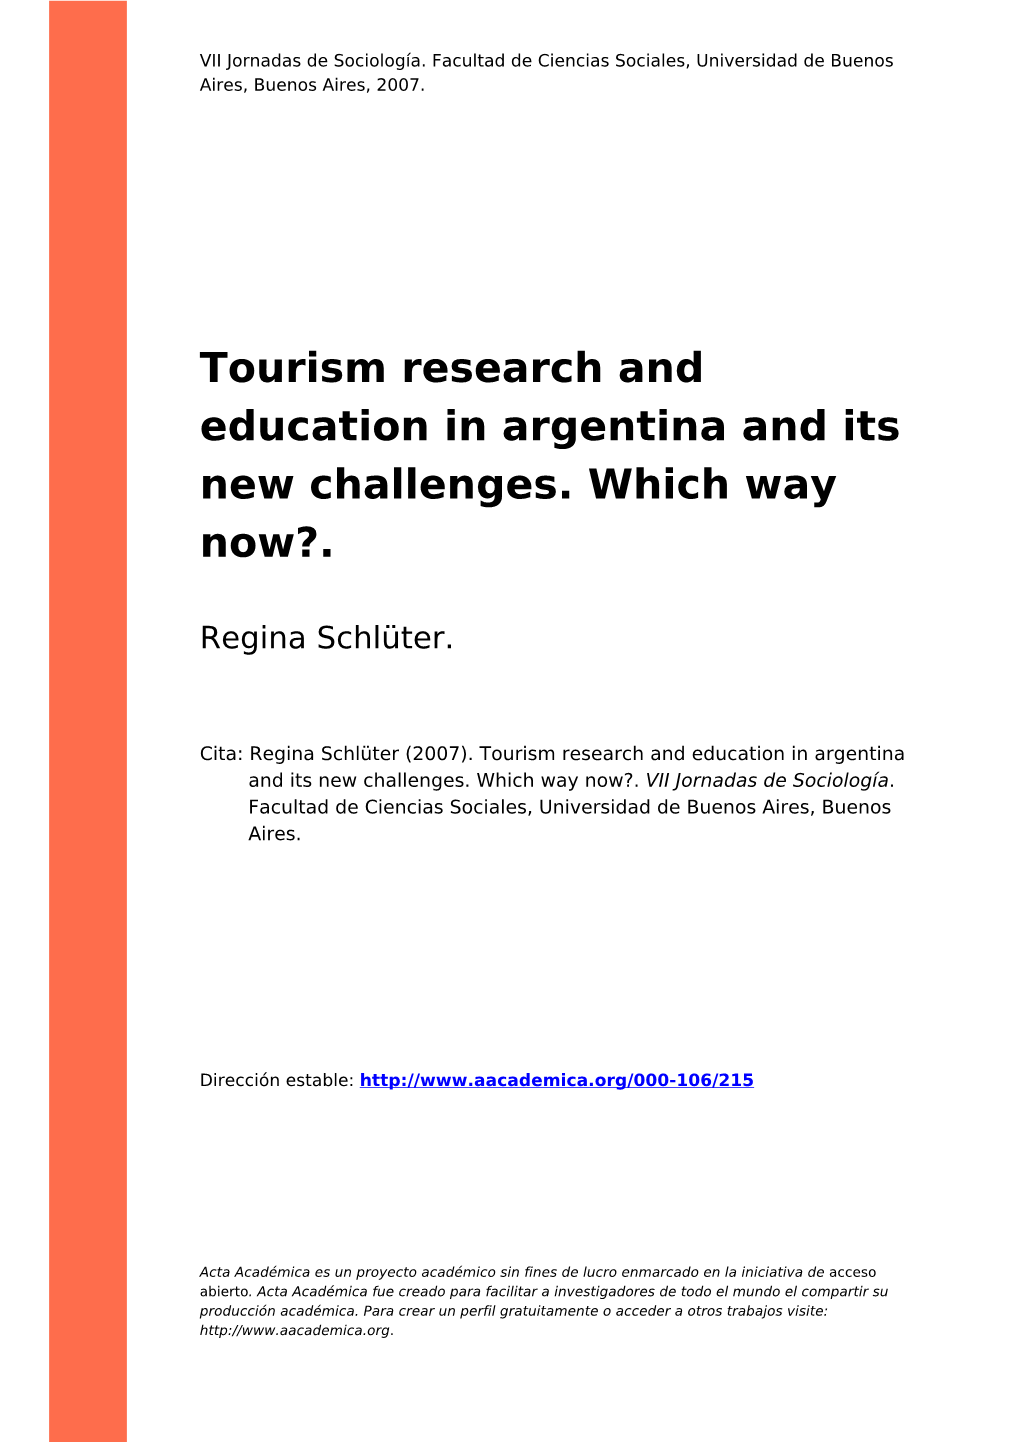 Tourism Research and Education in Argentina and Its New Challenges